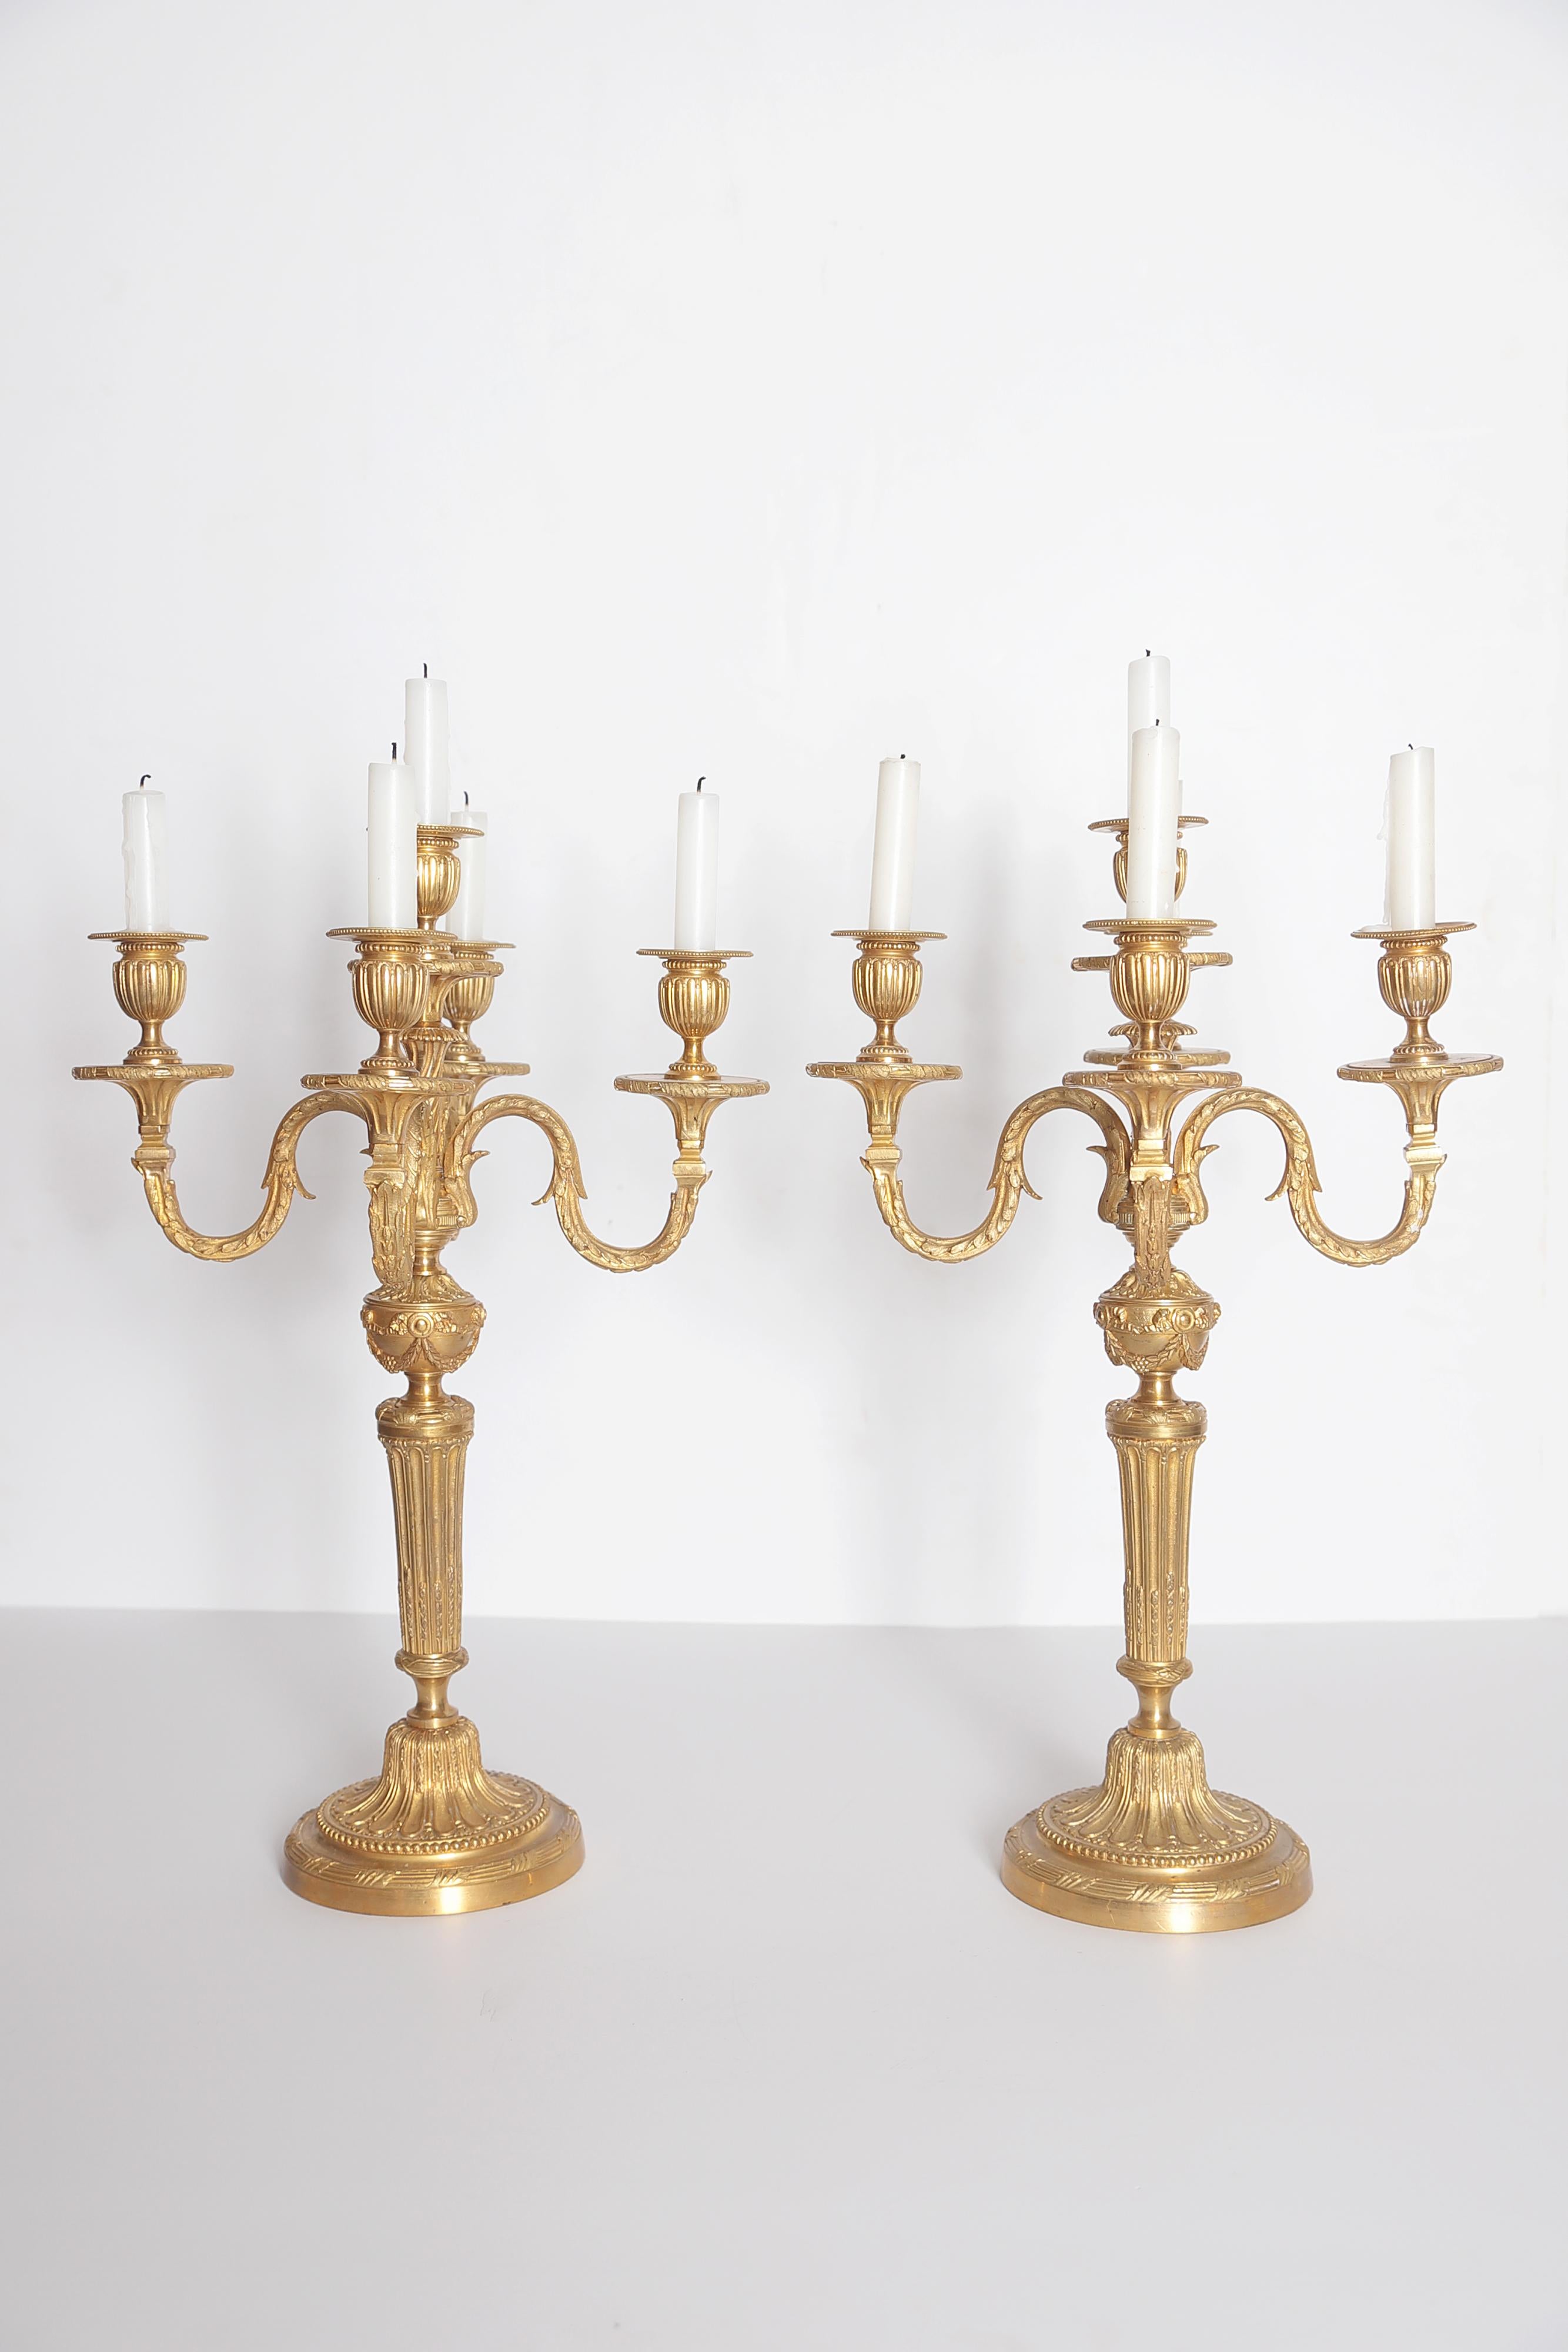 An elegant pair of Louis XVI style gilt bronze candelabra, columnar form on round base with center candleholder and four branches / arms, classical decoration overall

several individual parts / pieces are stamped 1065 and E G.

Measures: 6.5